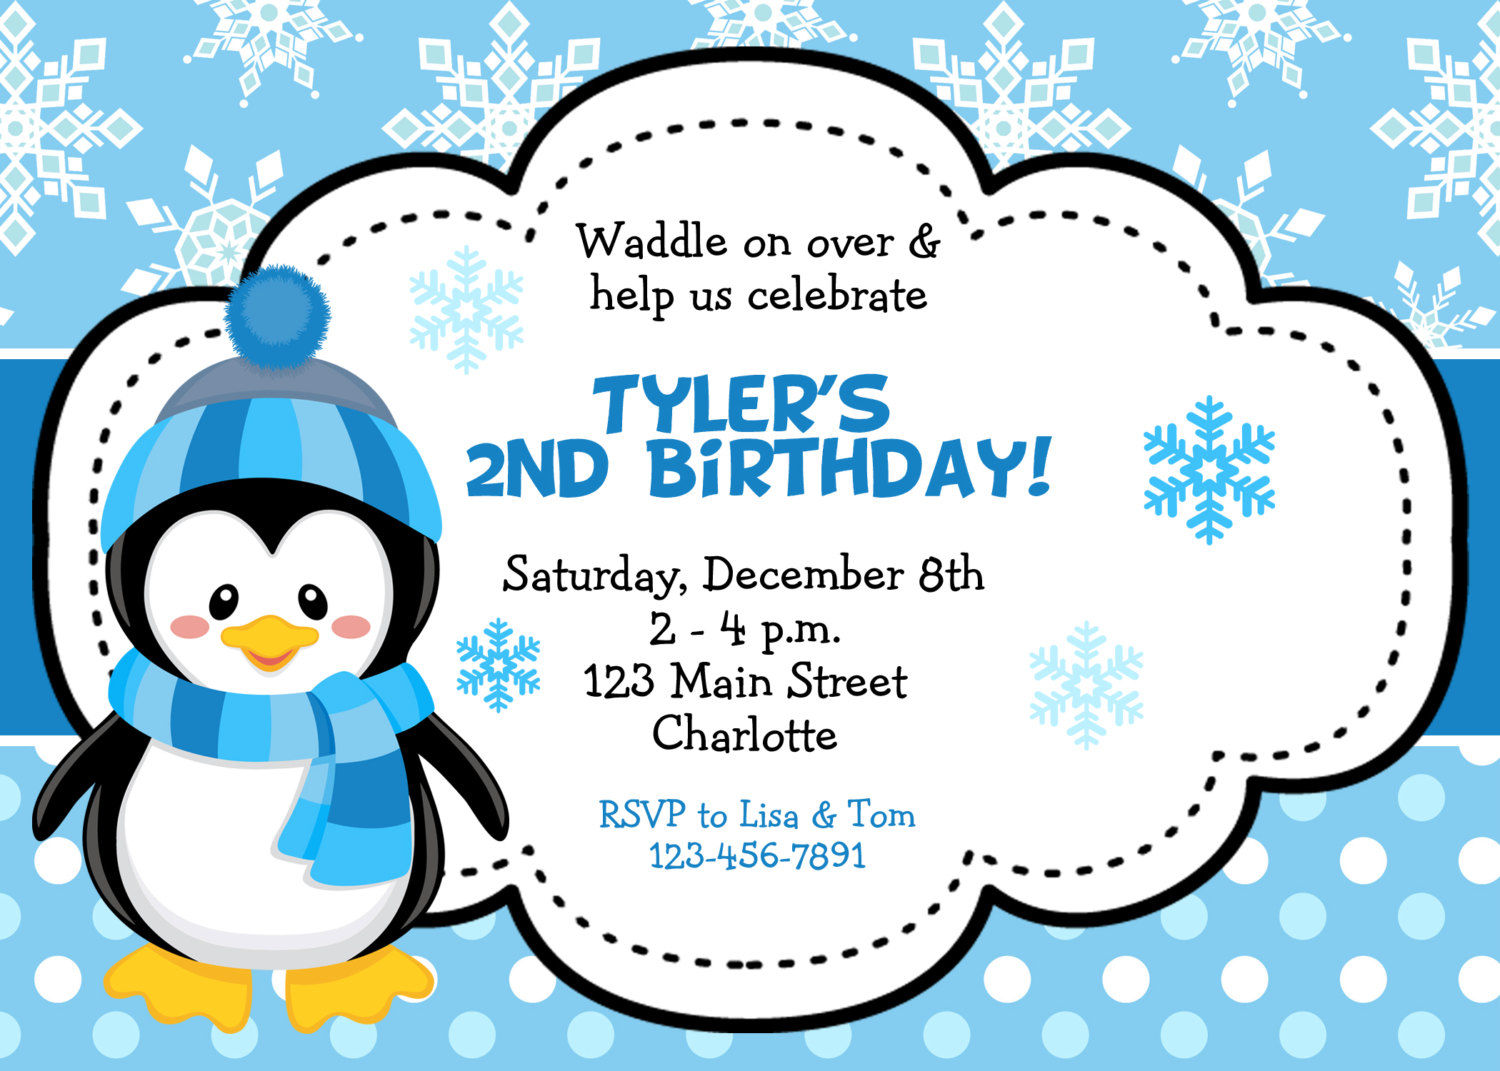 Winter Birthday Invitations Using An Excellent Design Idea Aimed To within size 1500 X 1071